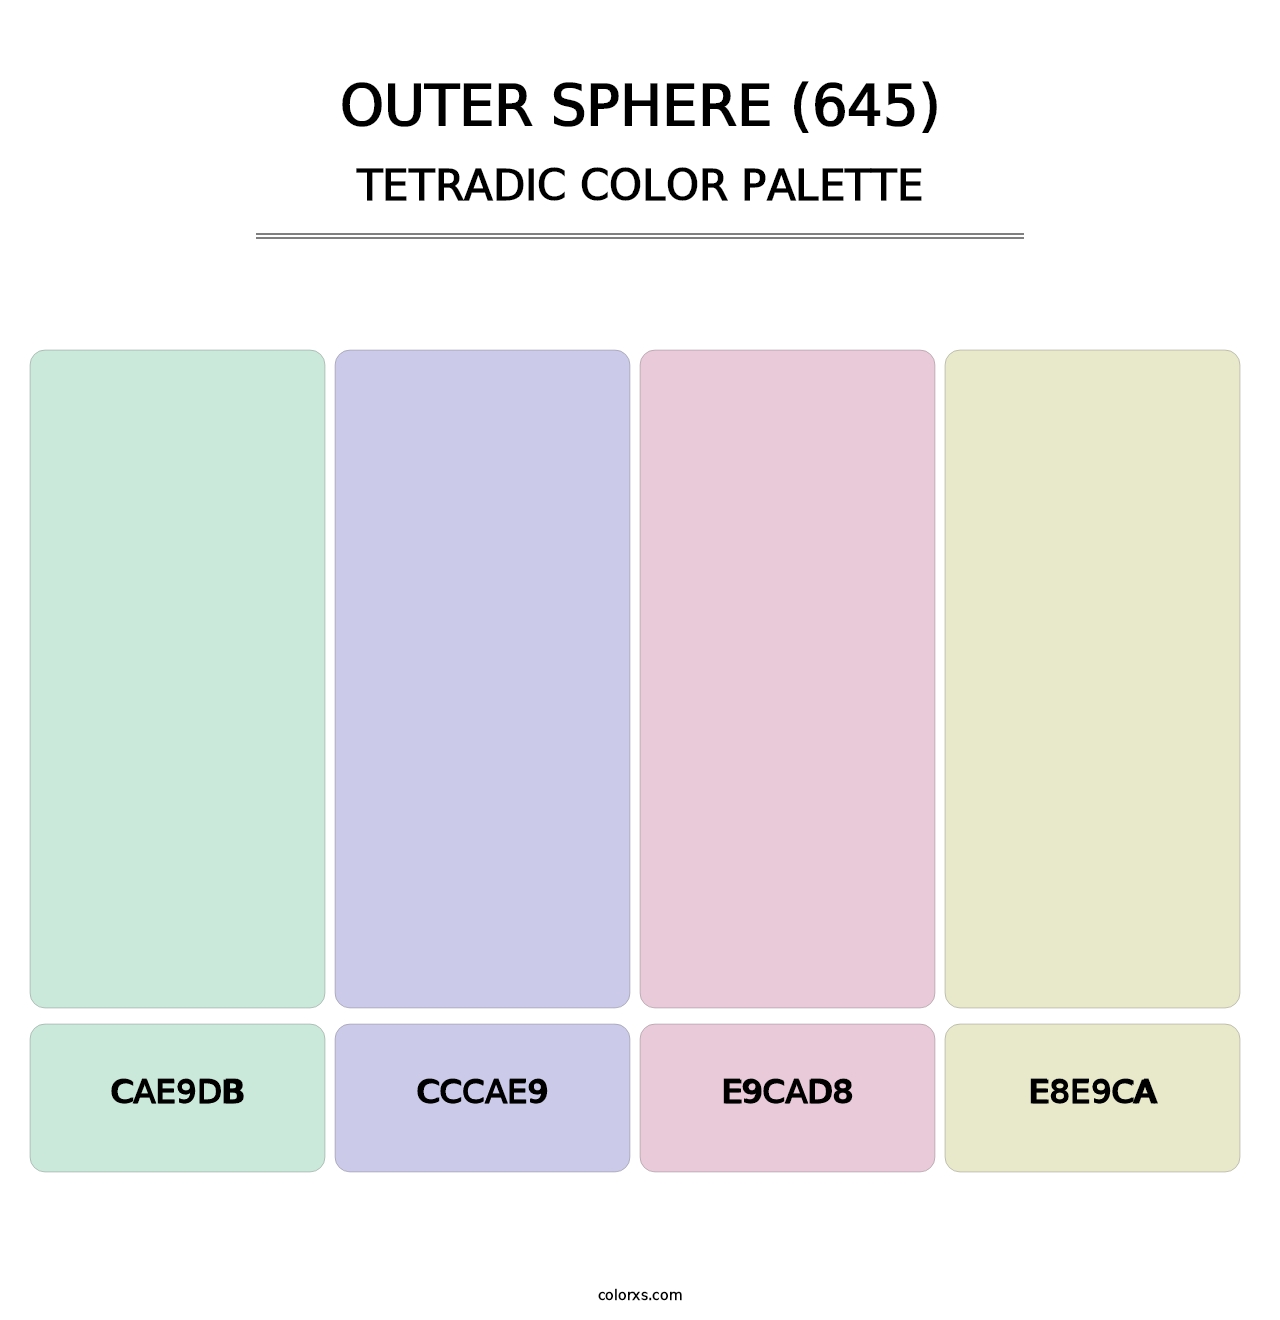 Outer Sphere (645) - Tetradic Color Palette